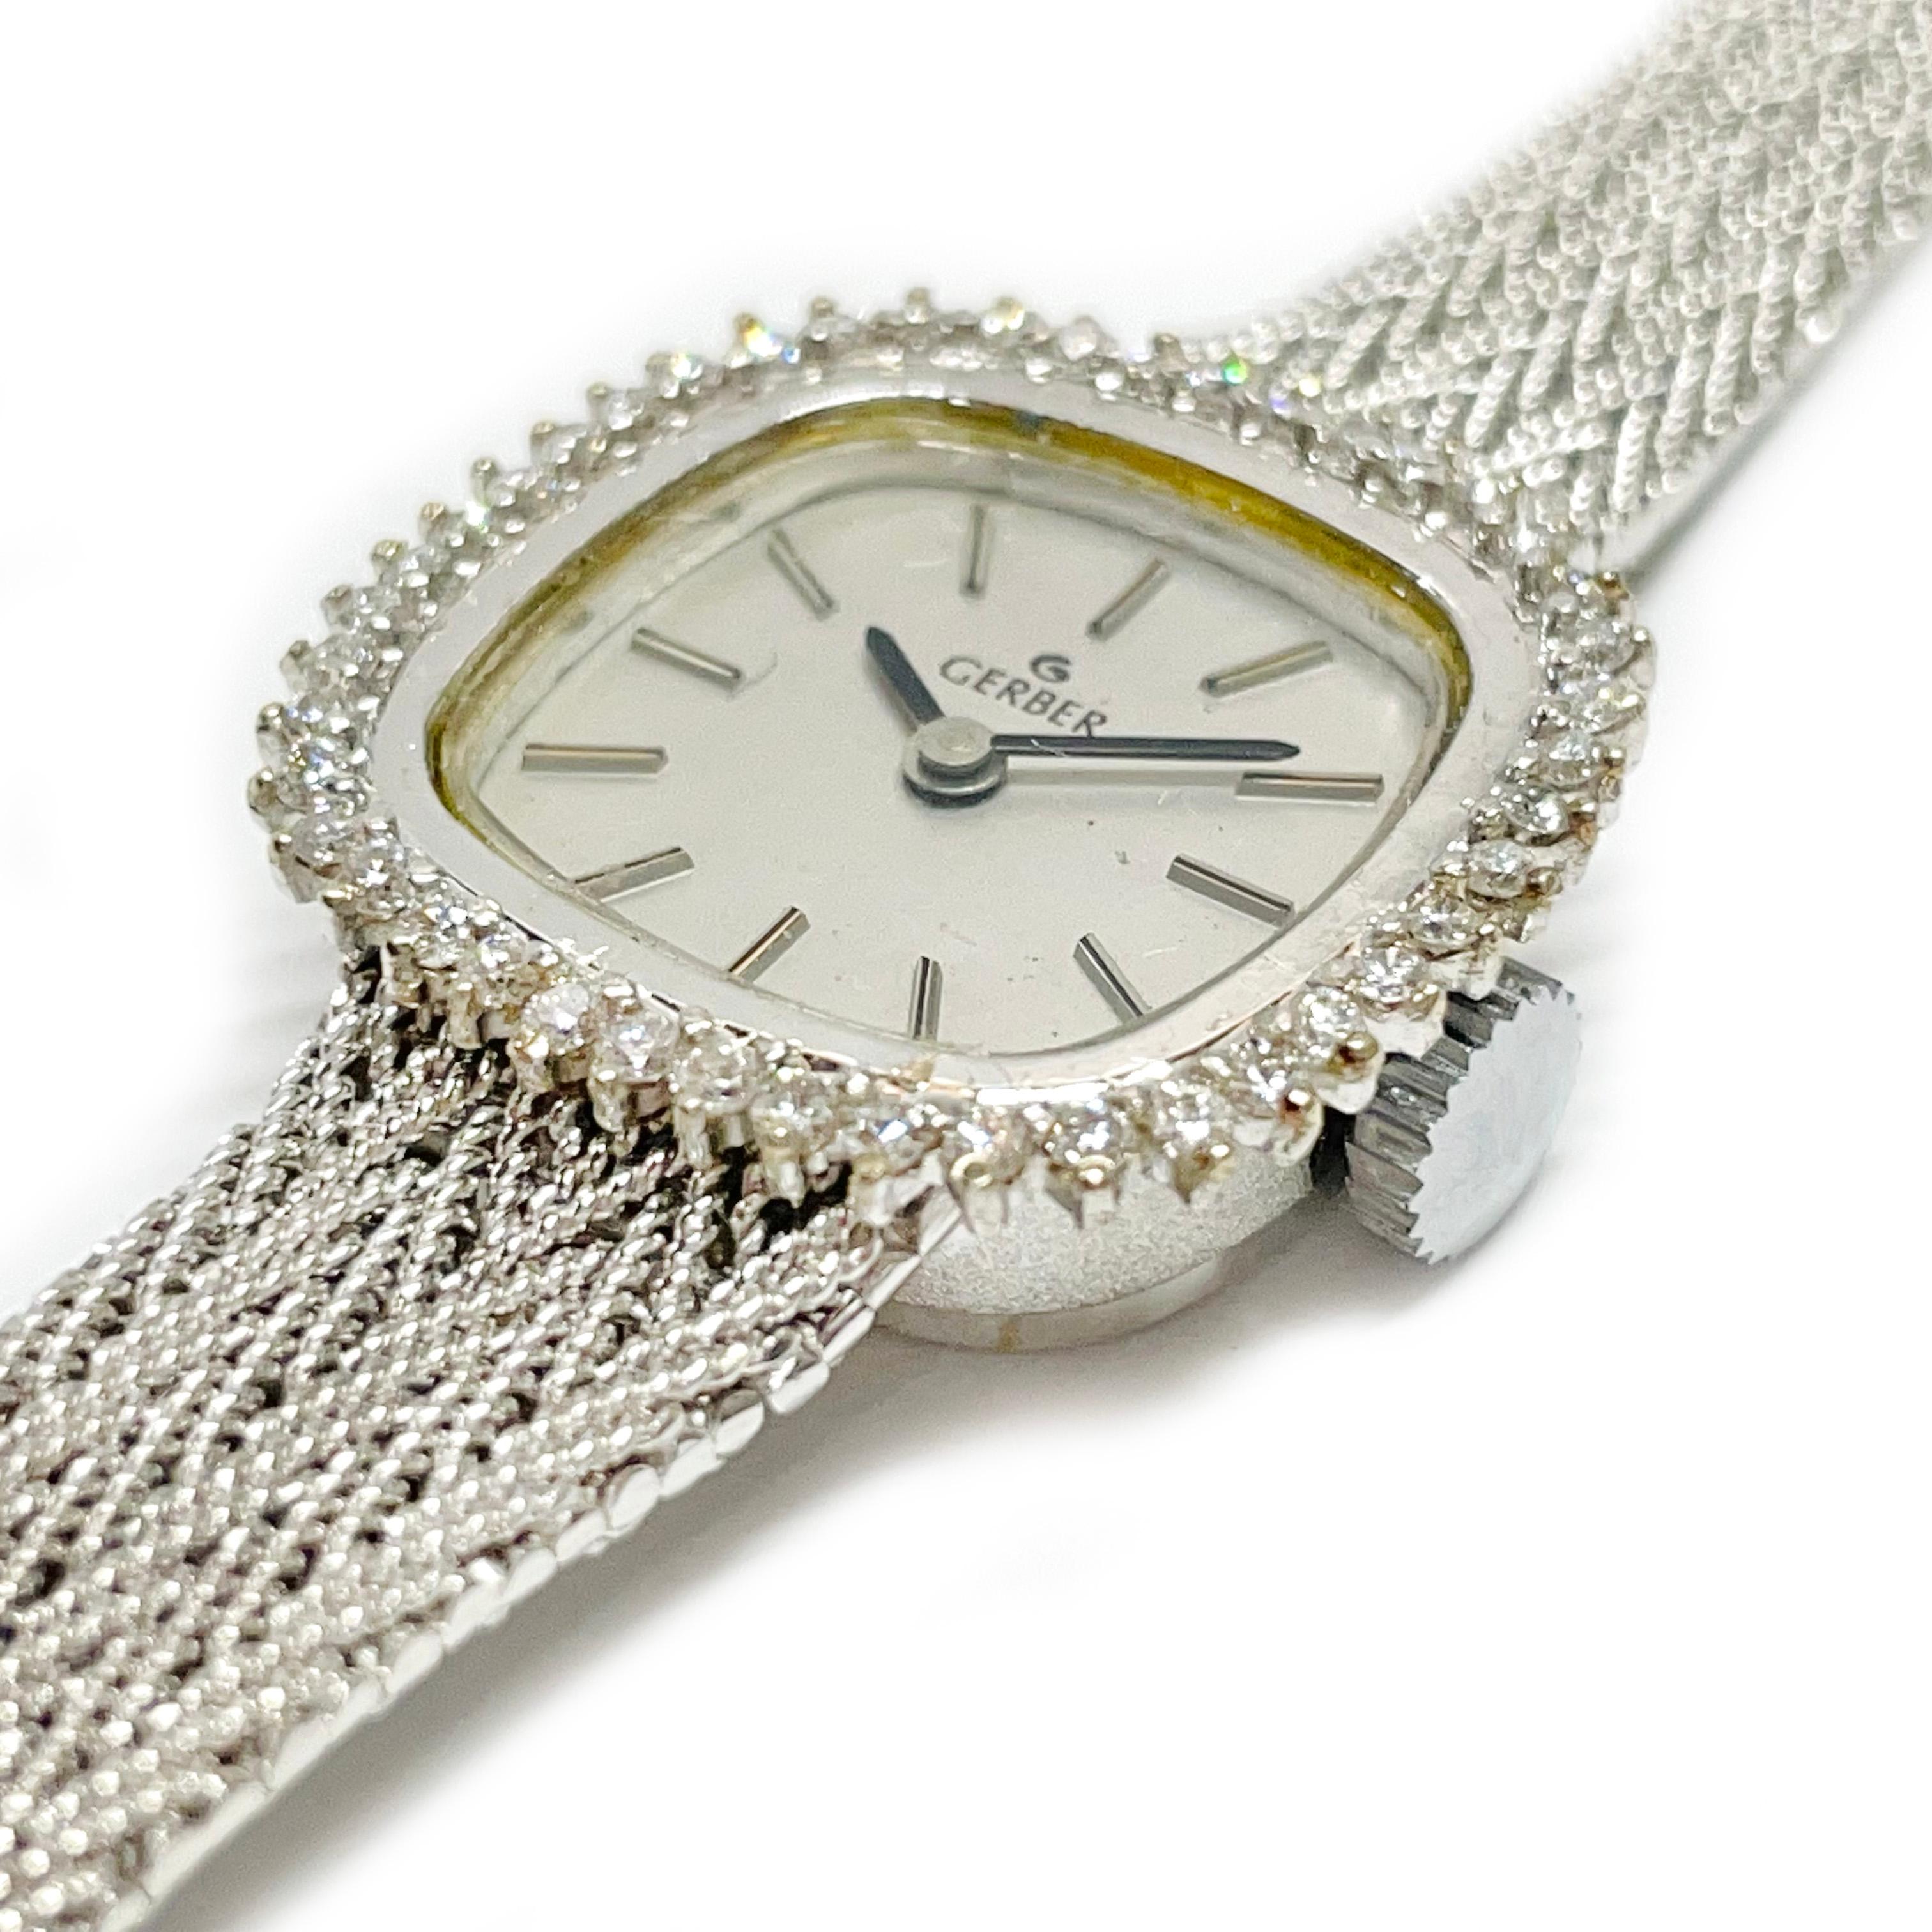 Vintage Gerber 14 karat white gold diamond Swiss movement wristwatch. The watch features a silver dial, black hour and minute hands, and a diamond surround. Approximately forty-four round prong-set diamonds adorn the surround. The diamonds have a